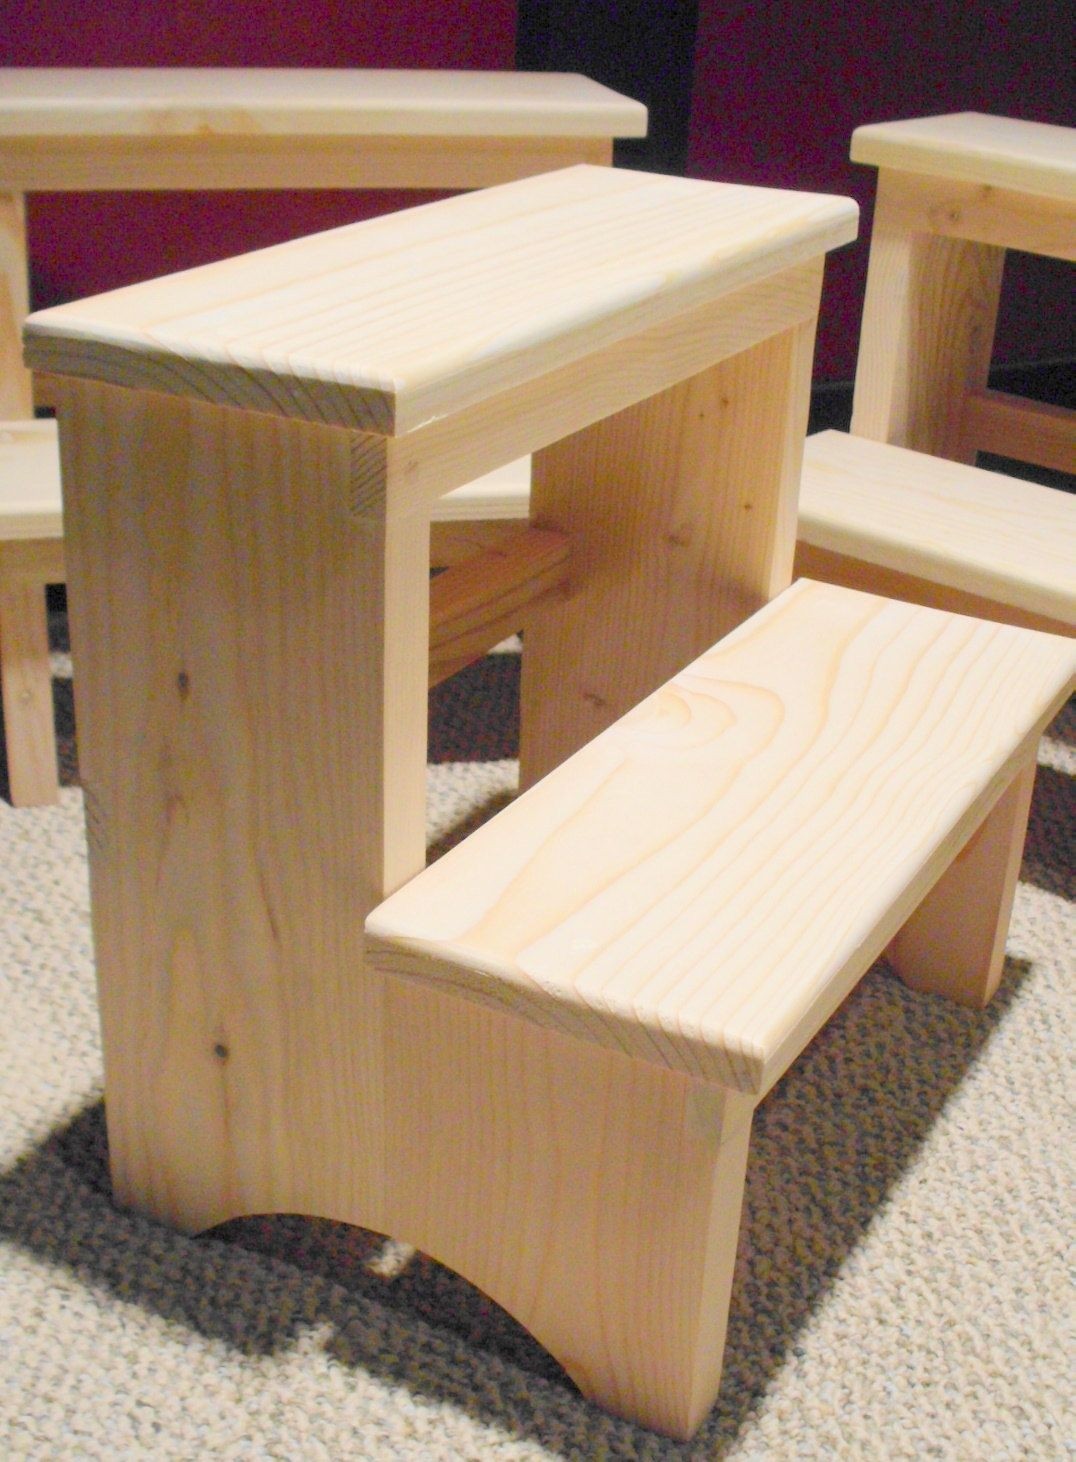 Handcrafted shaker inspired pine step